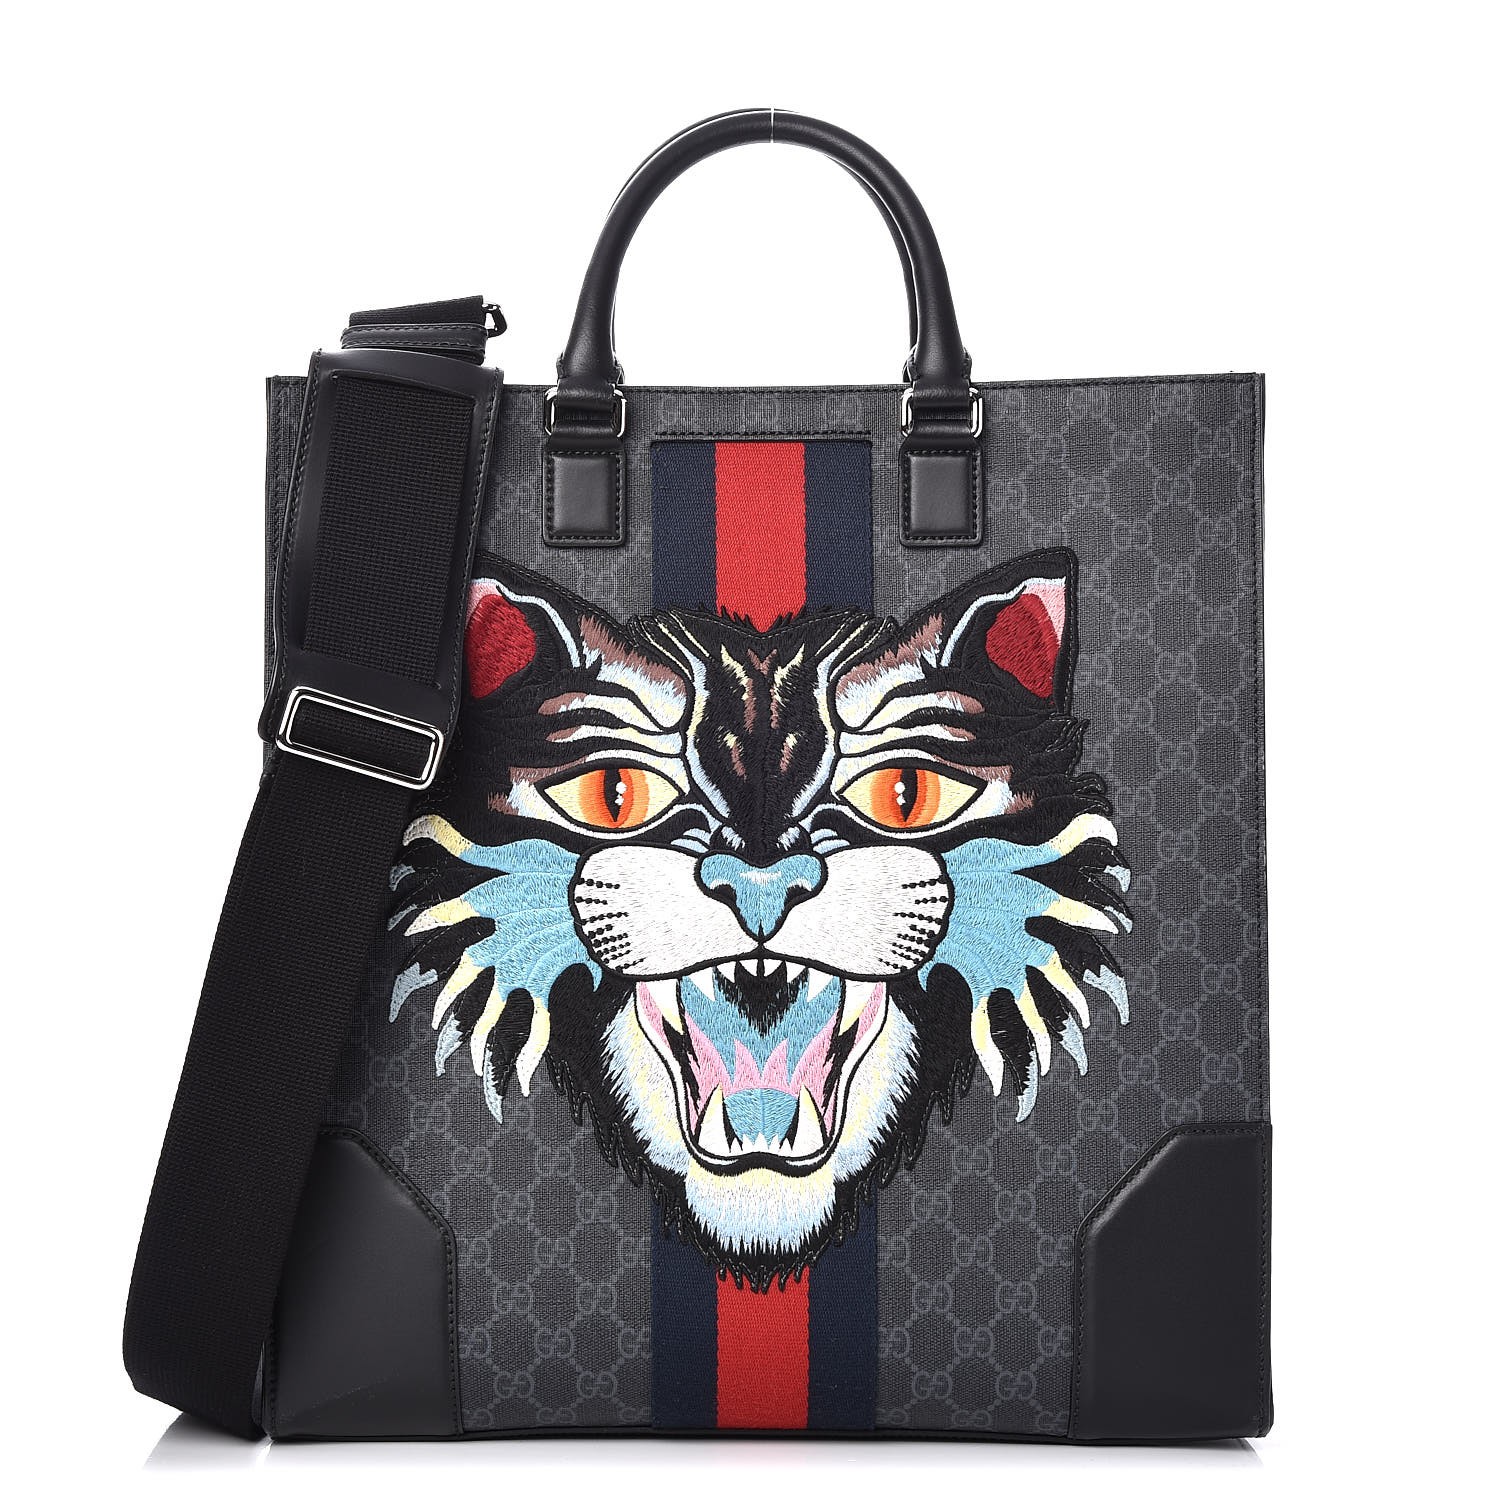 GUCCI GG Supreme Monogram Embroidered Angry Cat Tote Black 249949